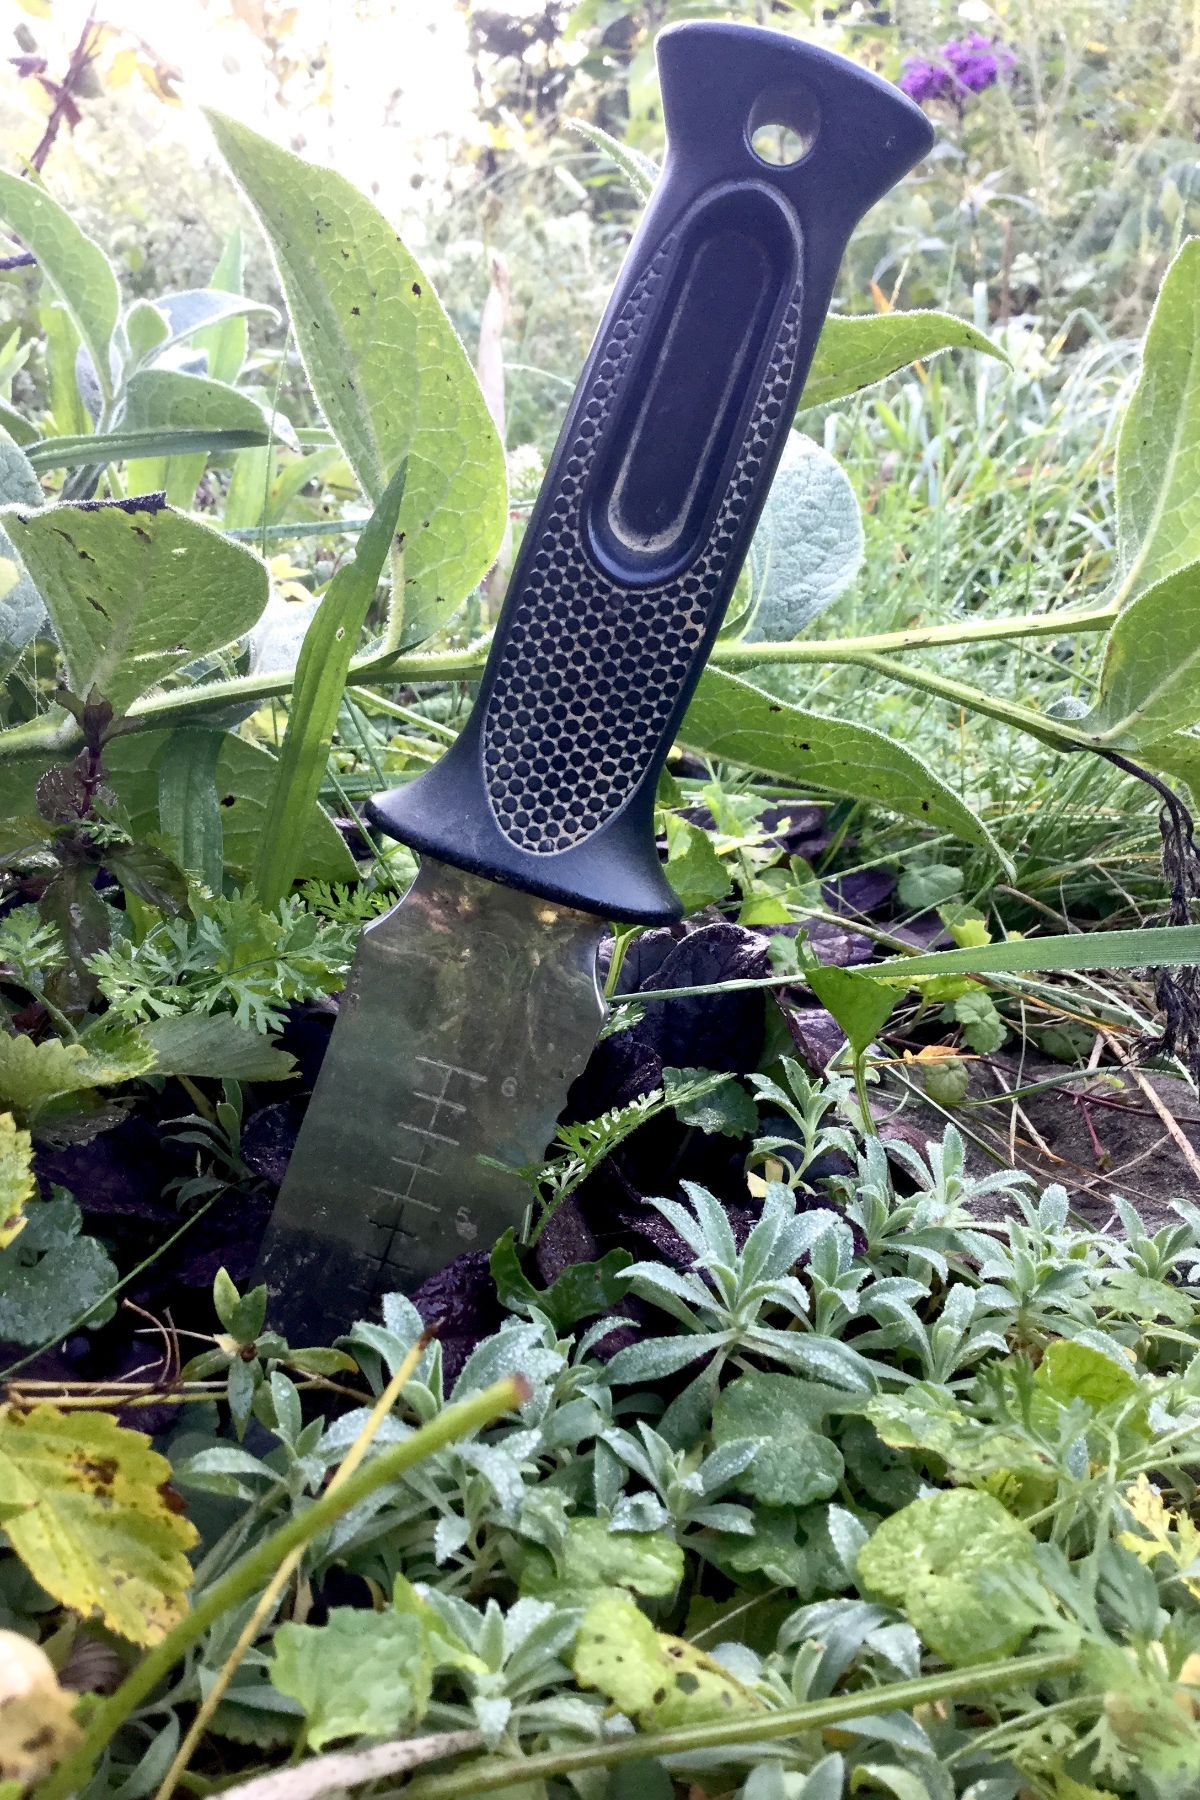 Japanese hori hori knives are extremely useful garden tools